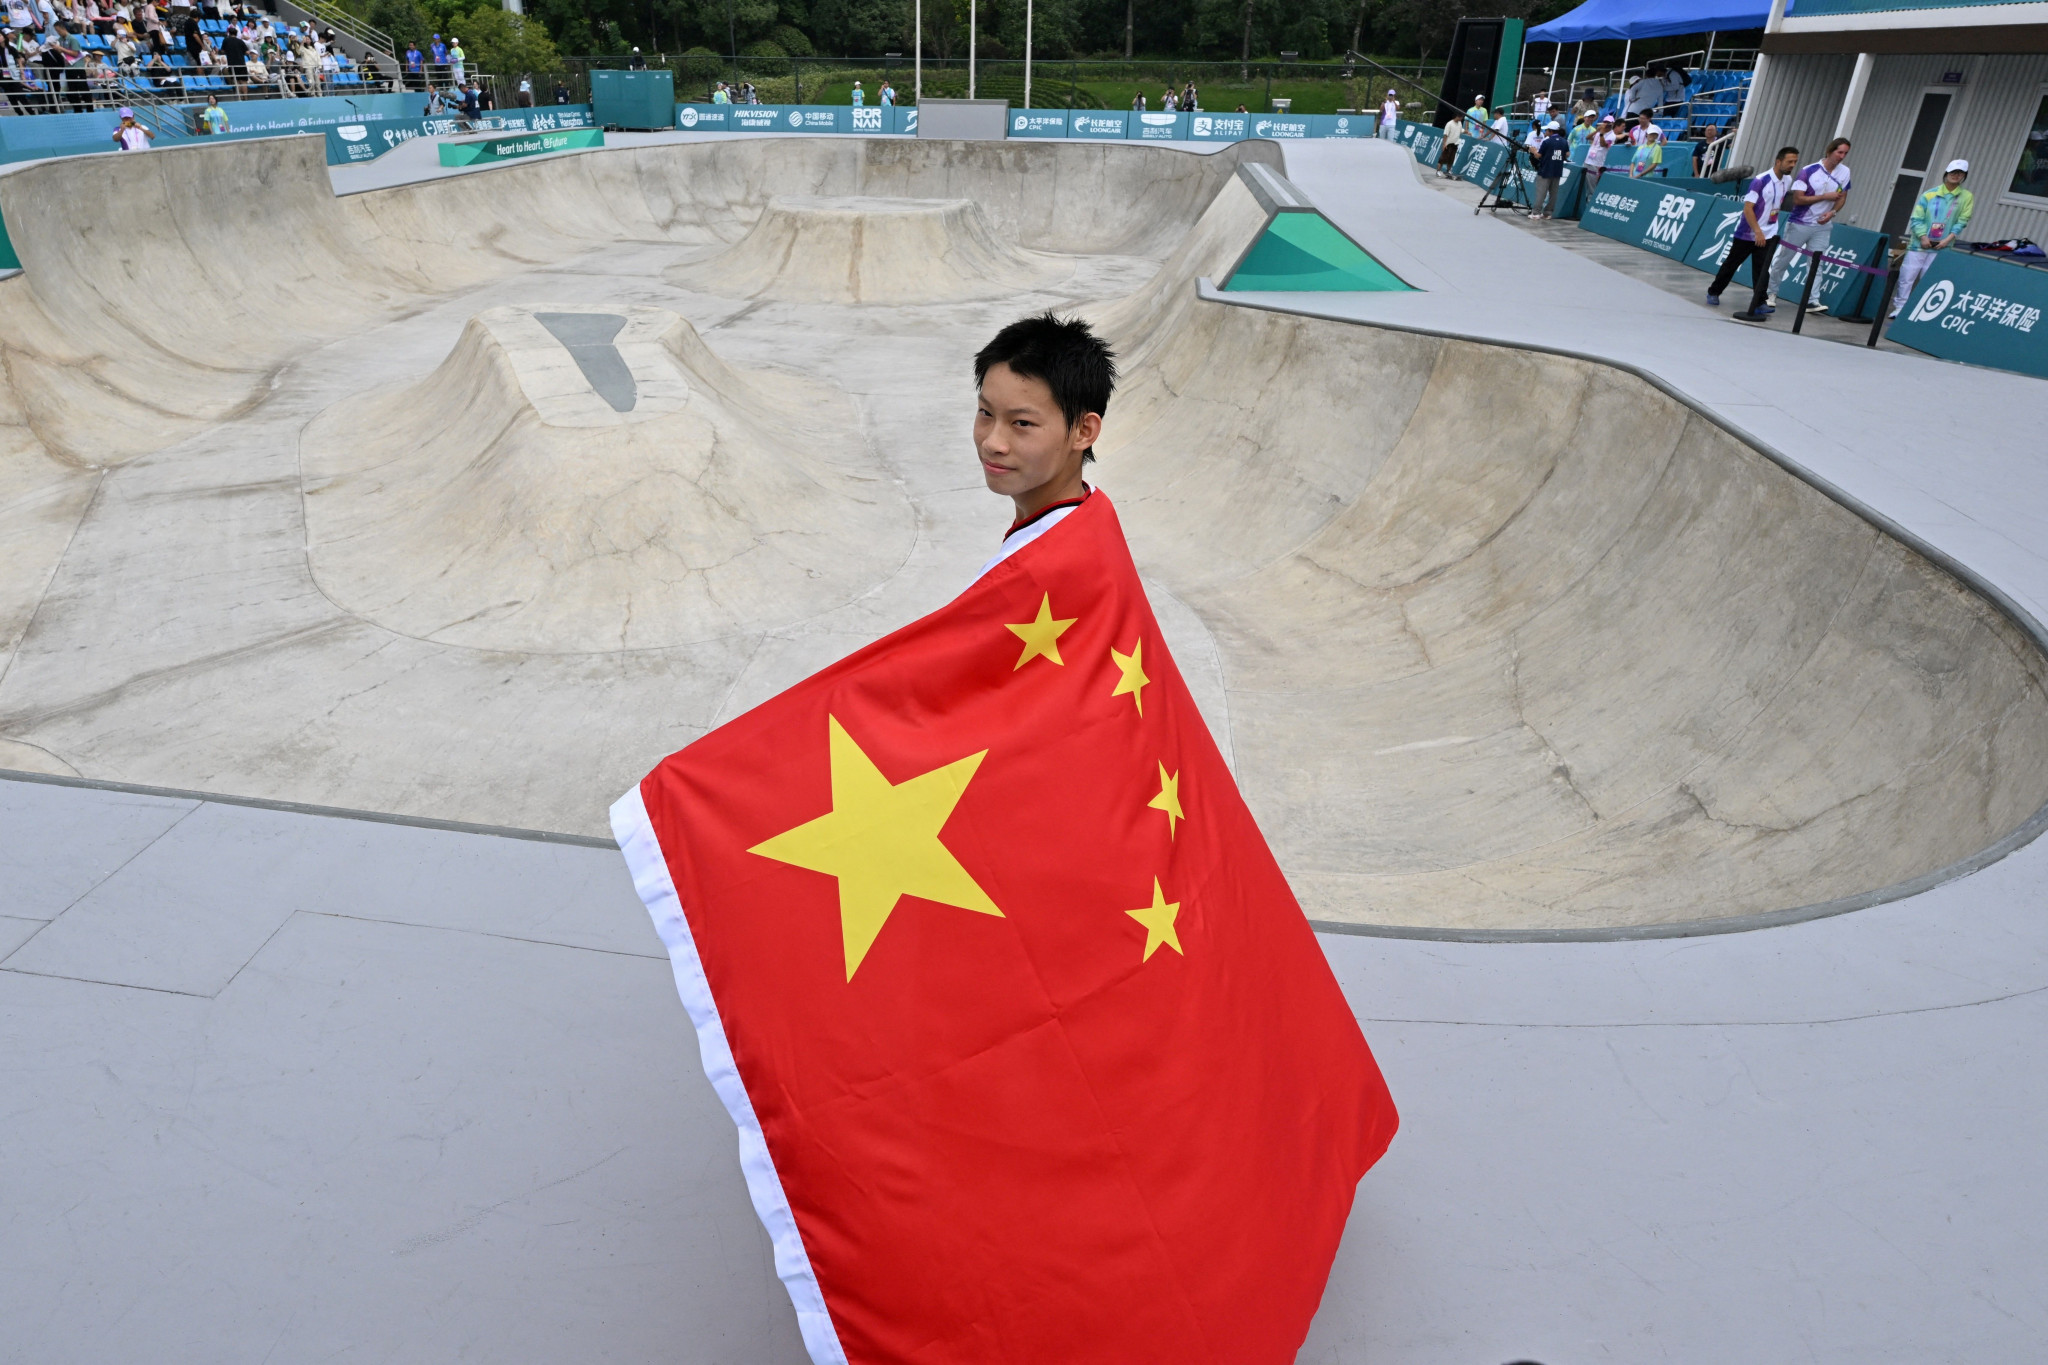 China's Chen Ye displays his national flag after winning the men's park skateboarding title ©Getty Images